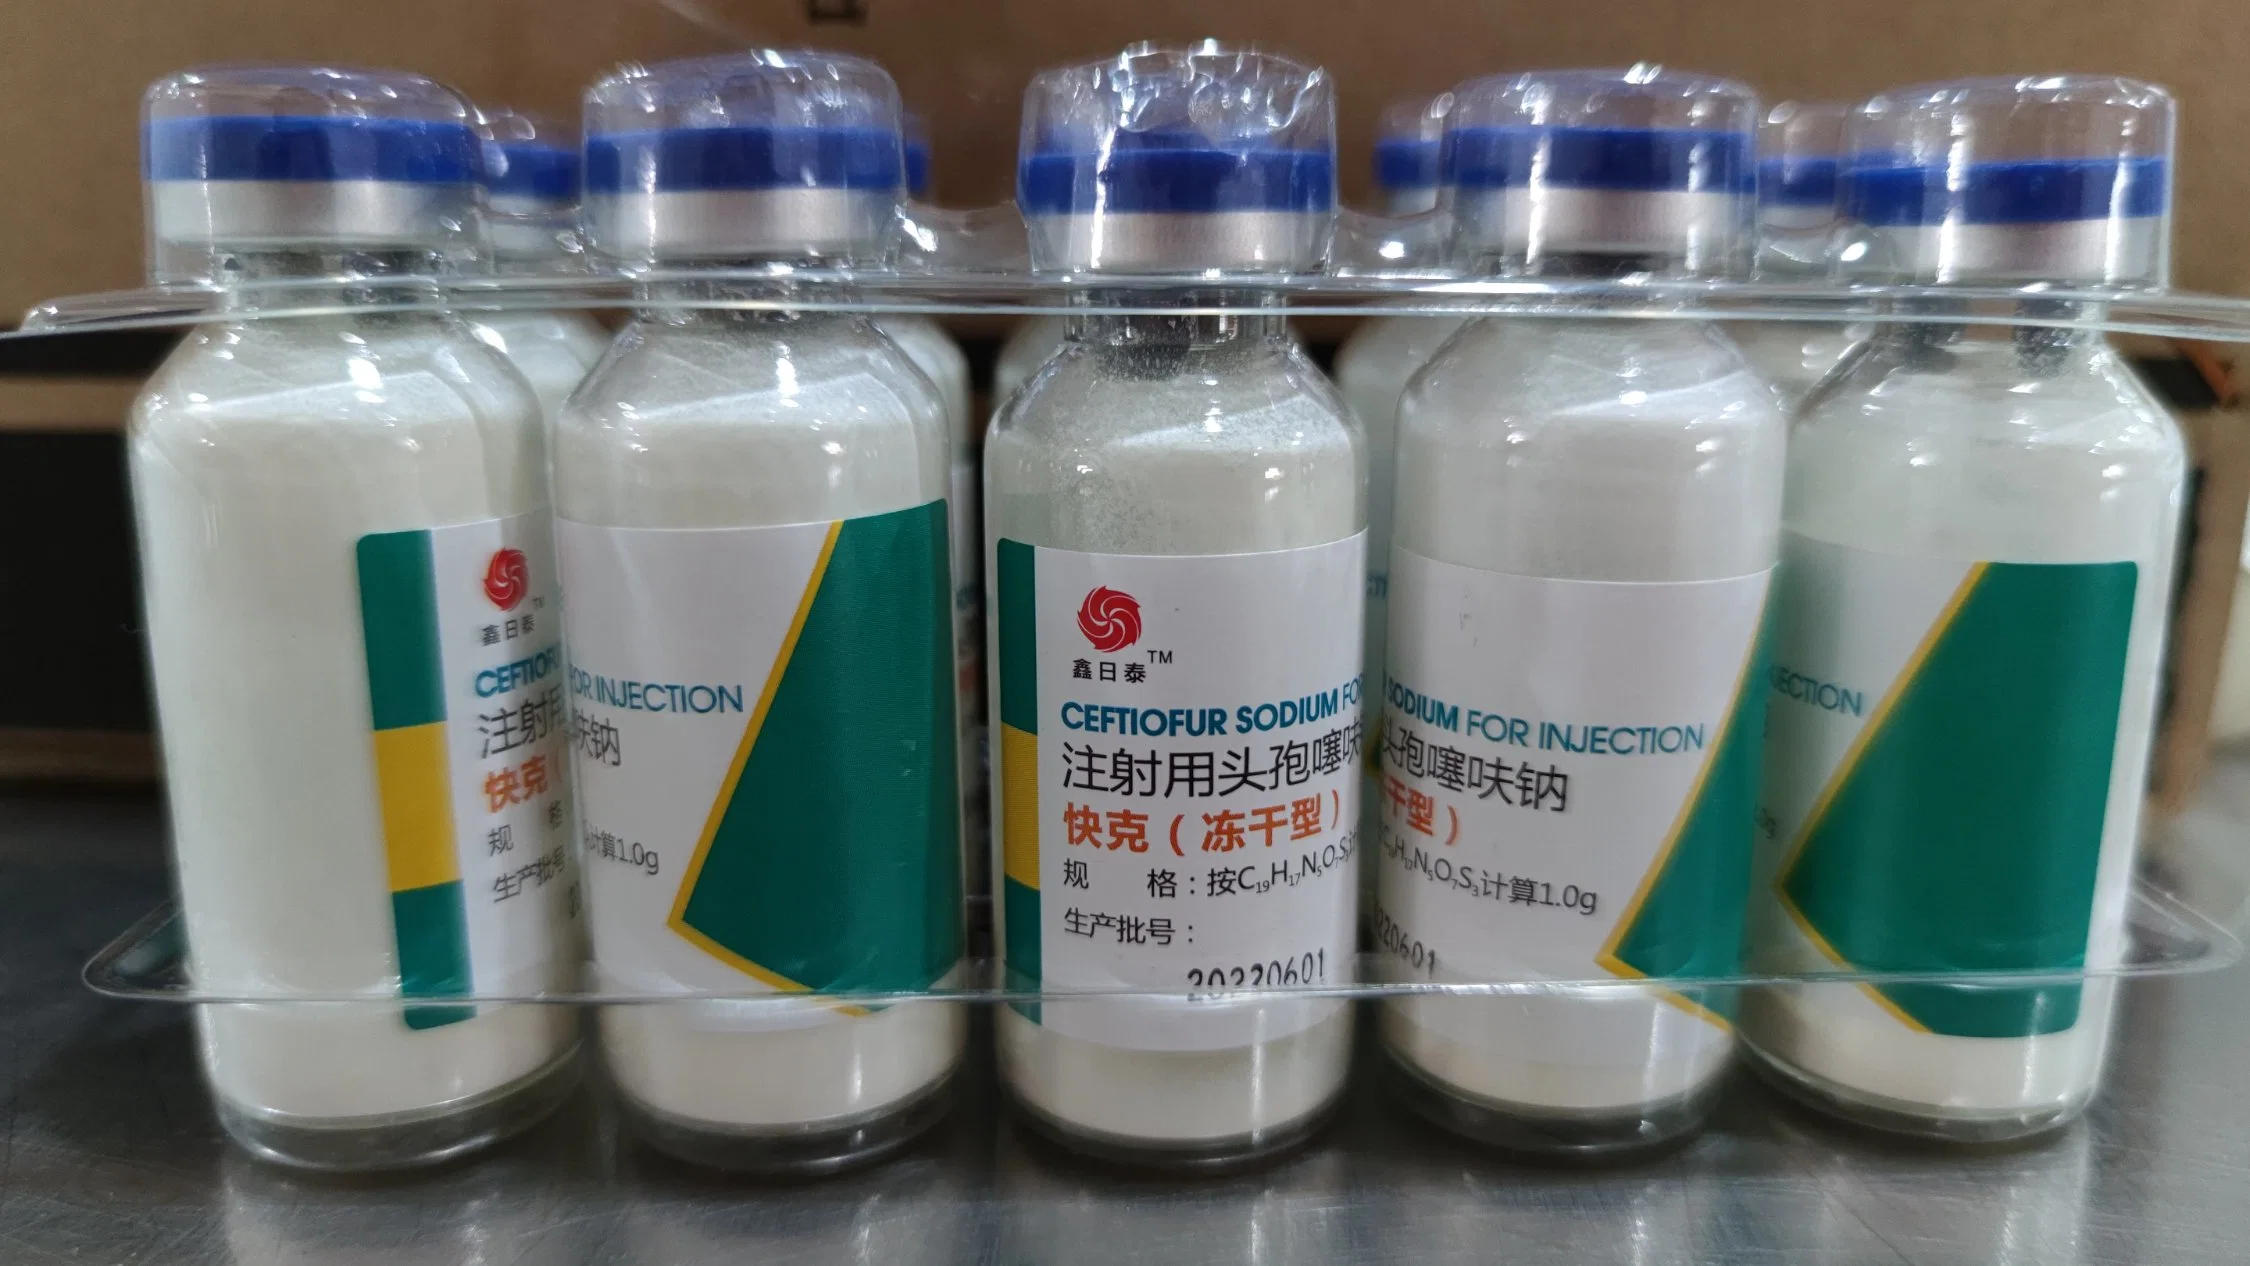 Antibiotic Drugs for Veterinary Use Ceftiofur Sodium Powder for Injection 1g